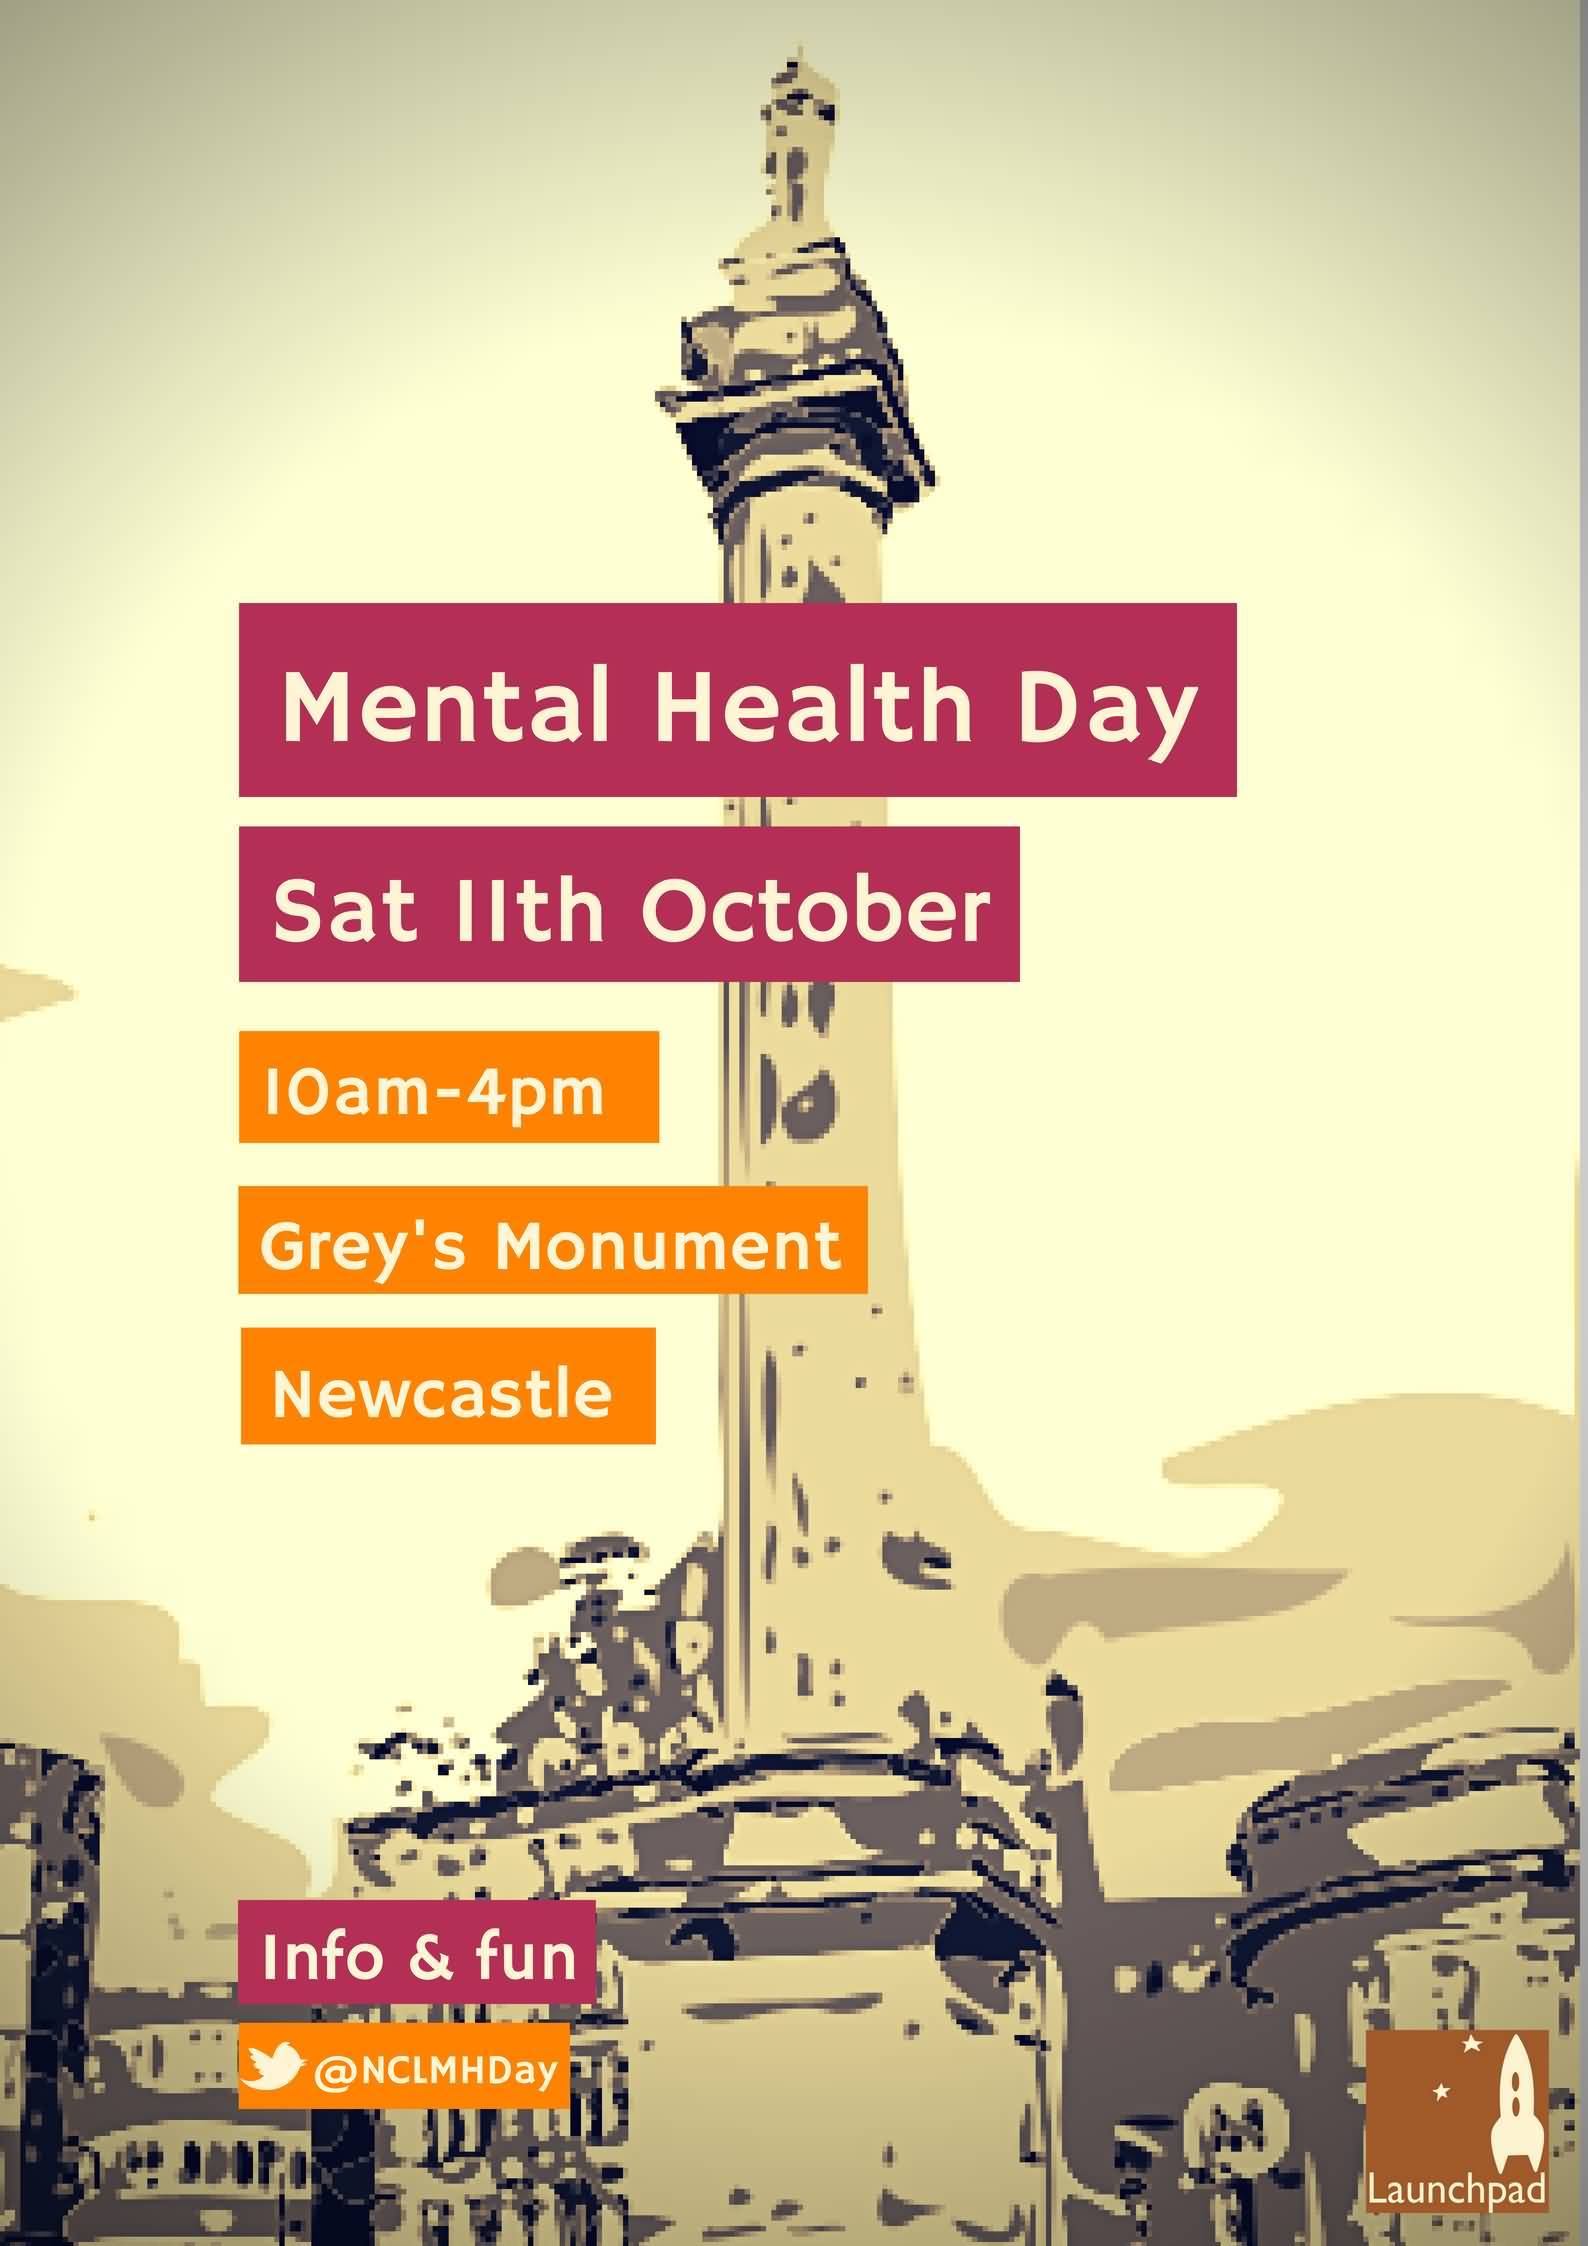 Mental Health Day Image